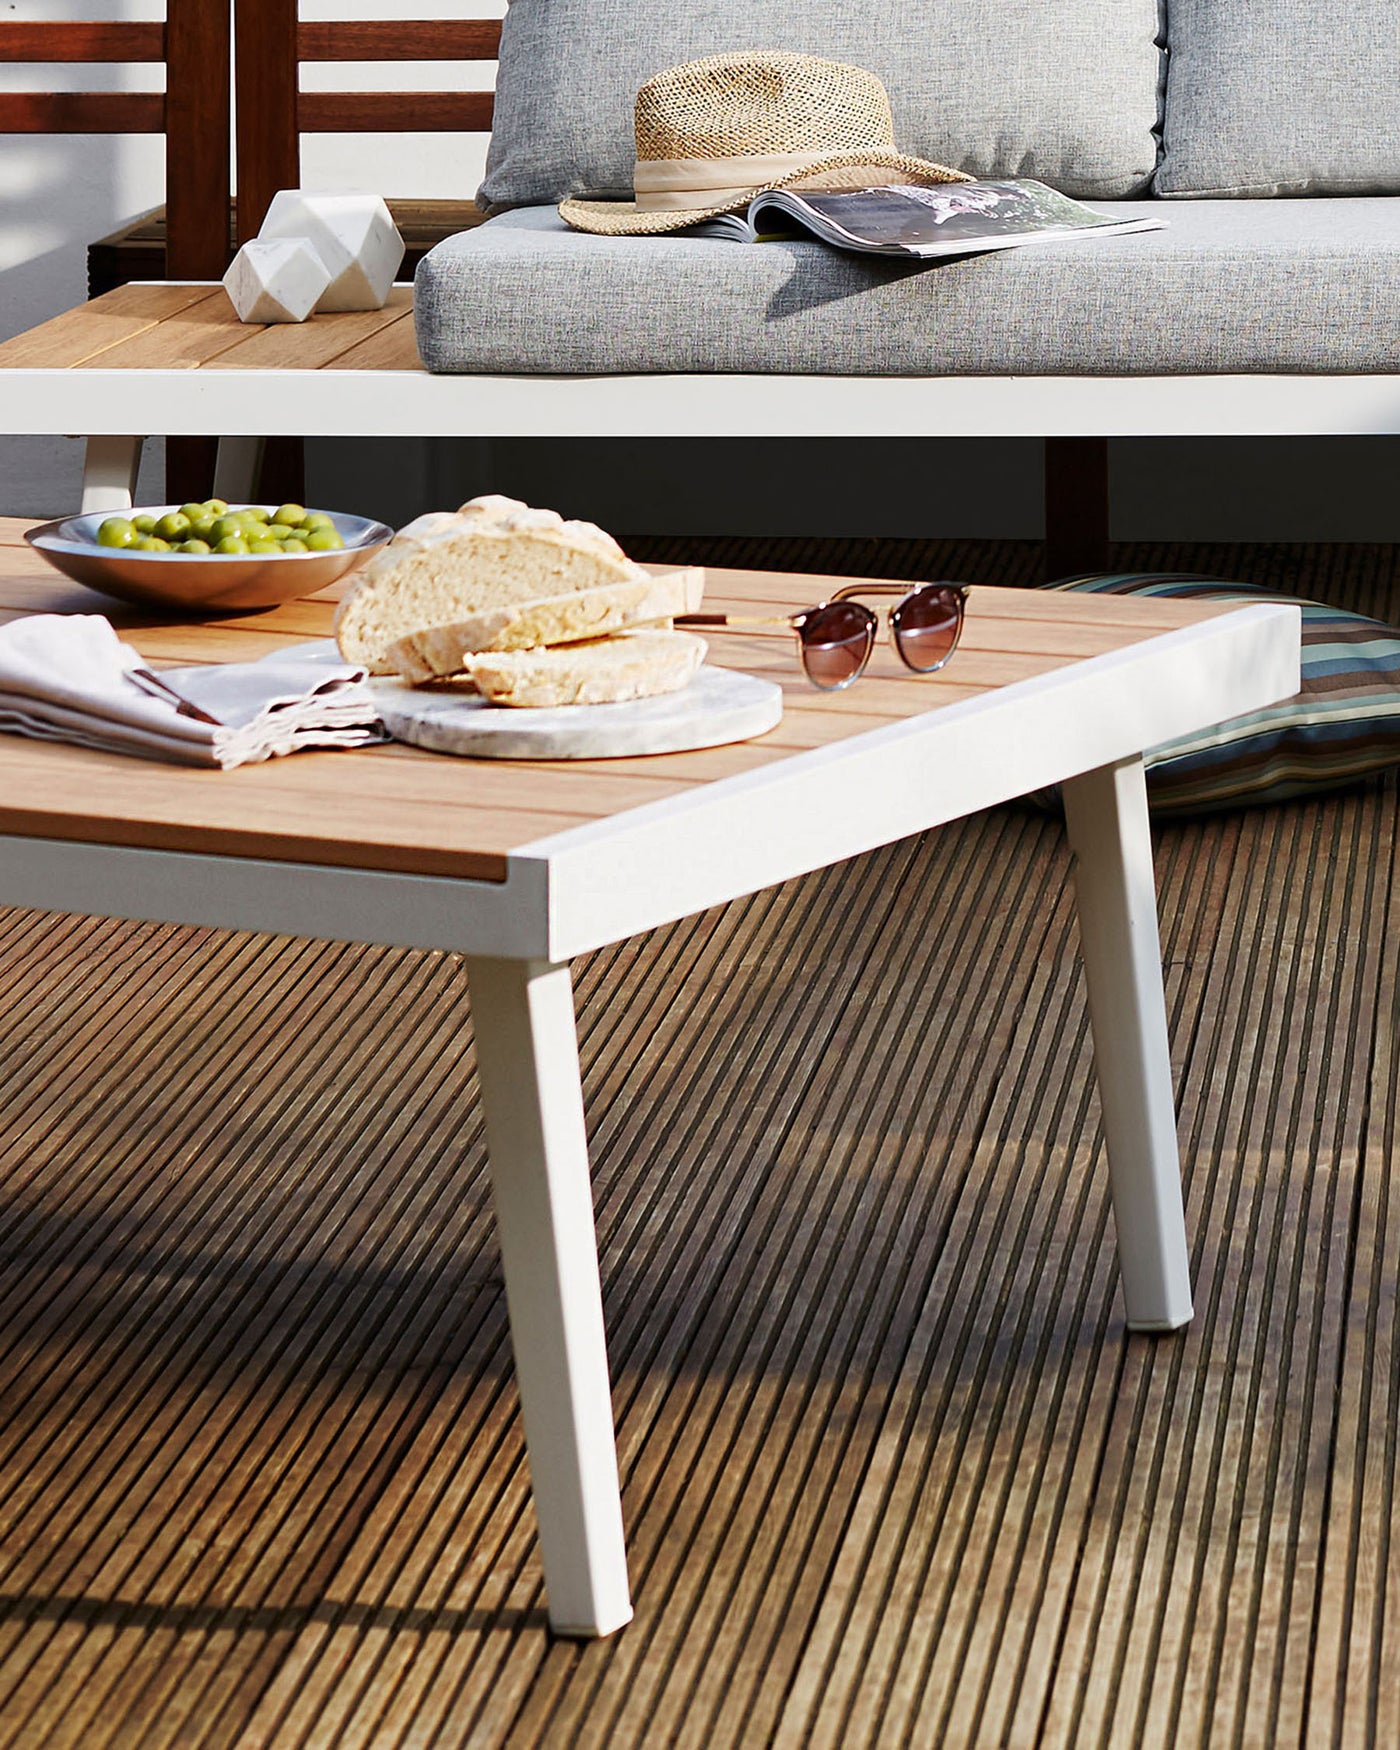 Modern outdoor two-tone wooden coffee table with white legs on a wooden deck, accompanied by a grey cushioned wooden sofa with decorative pillows, under natural sunlight.